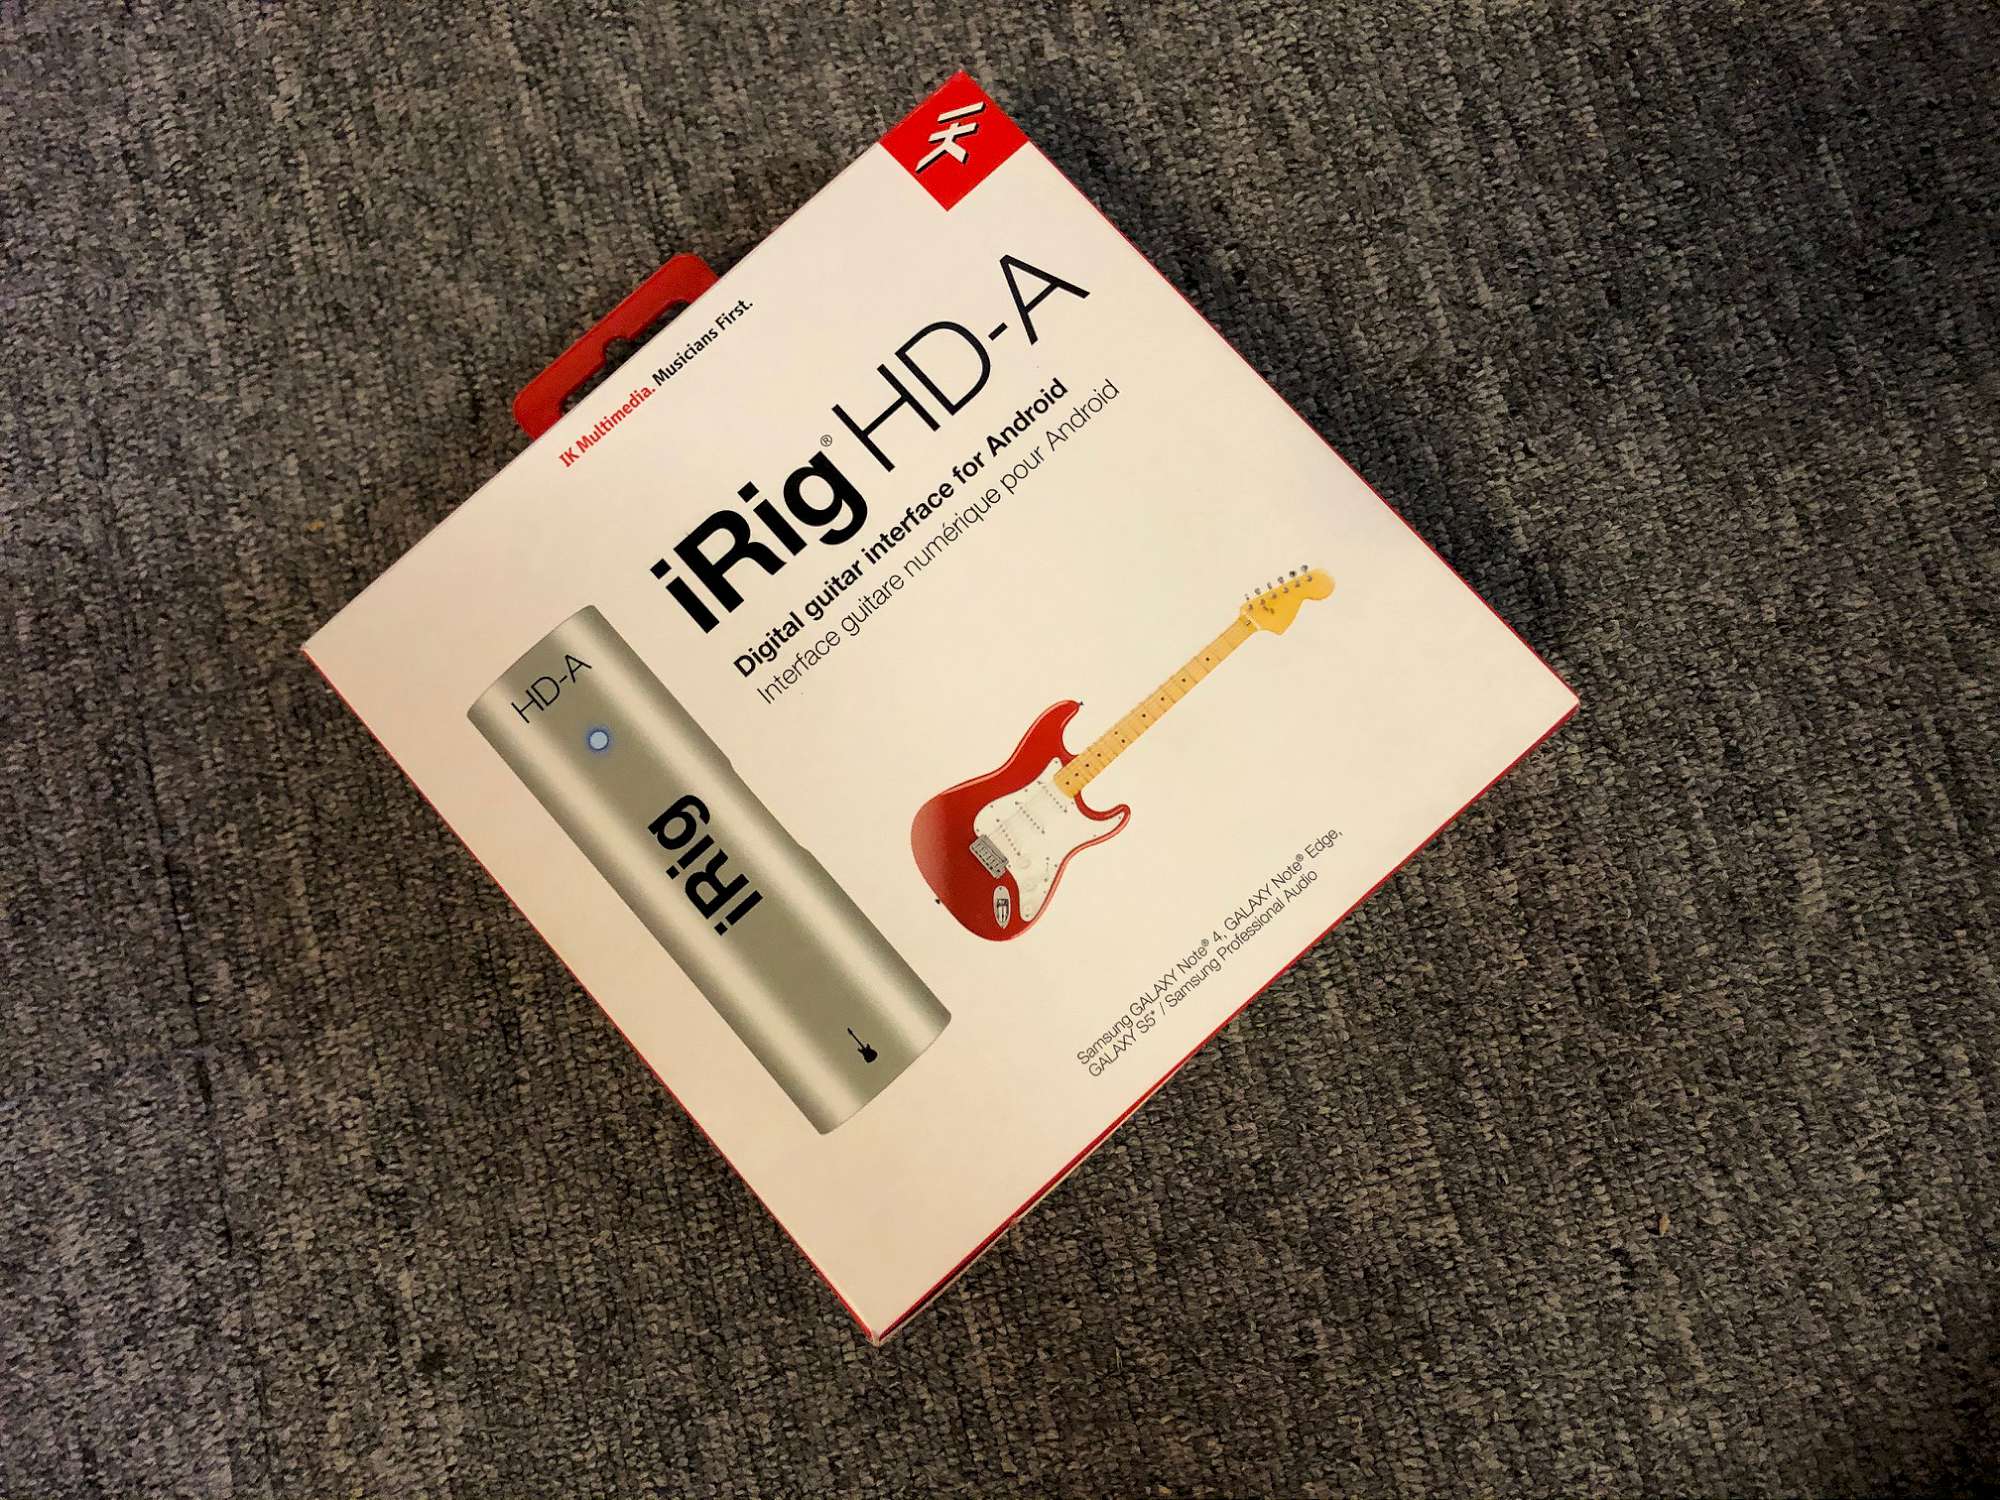 Hook Your Guitar to Your iPhone and Rock Out with iRig